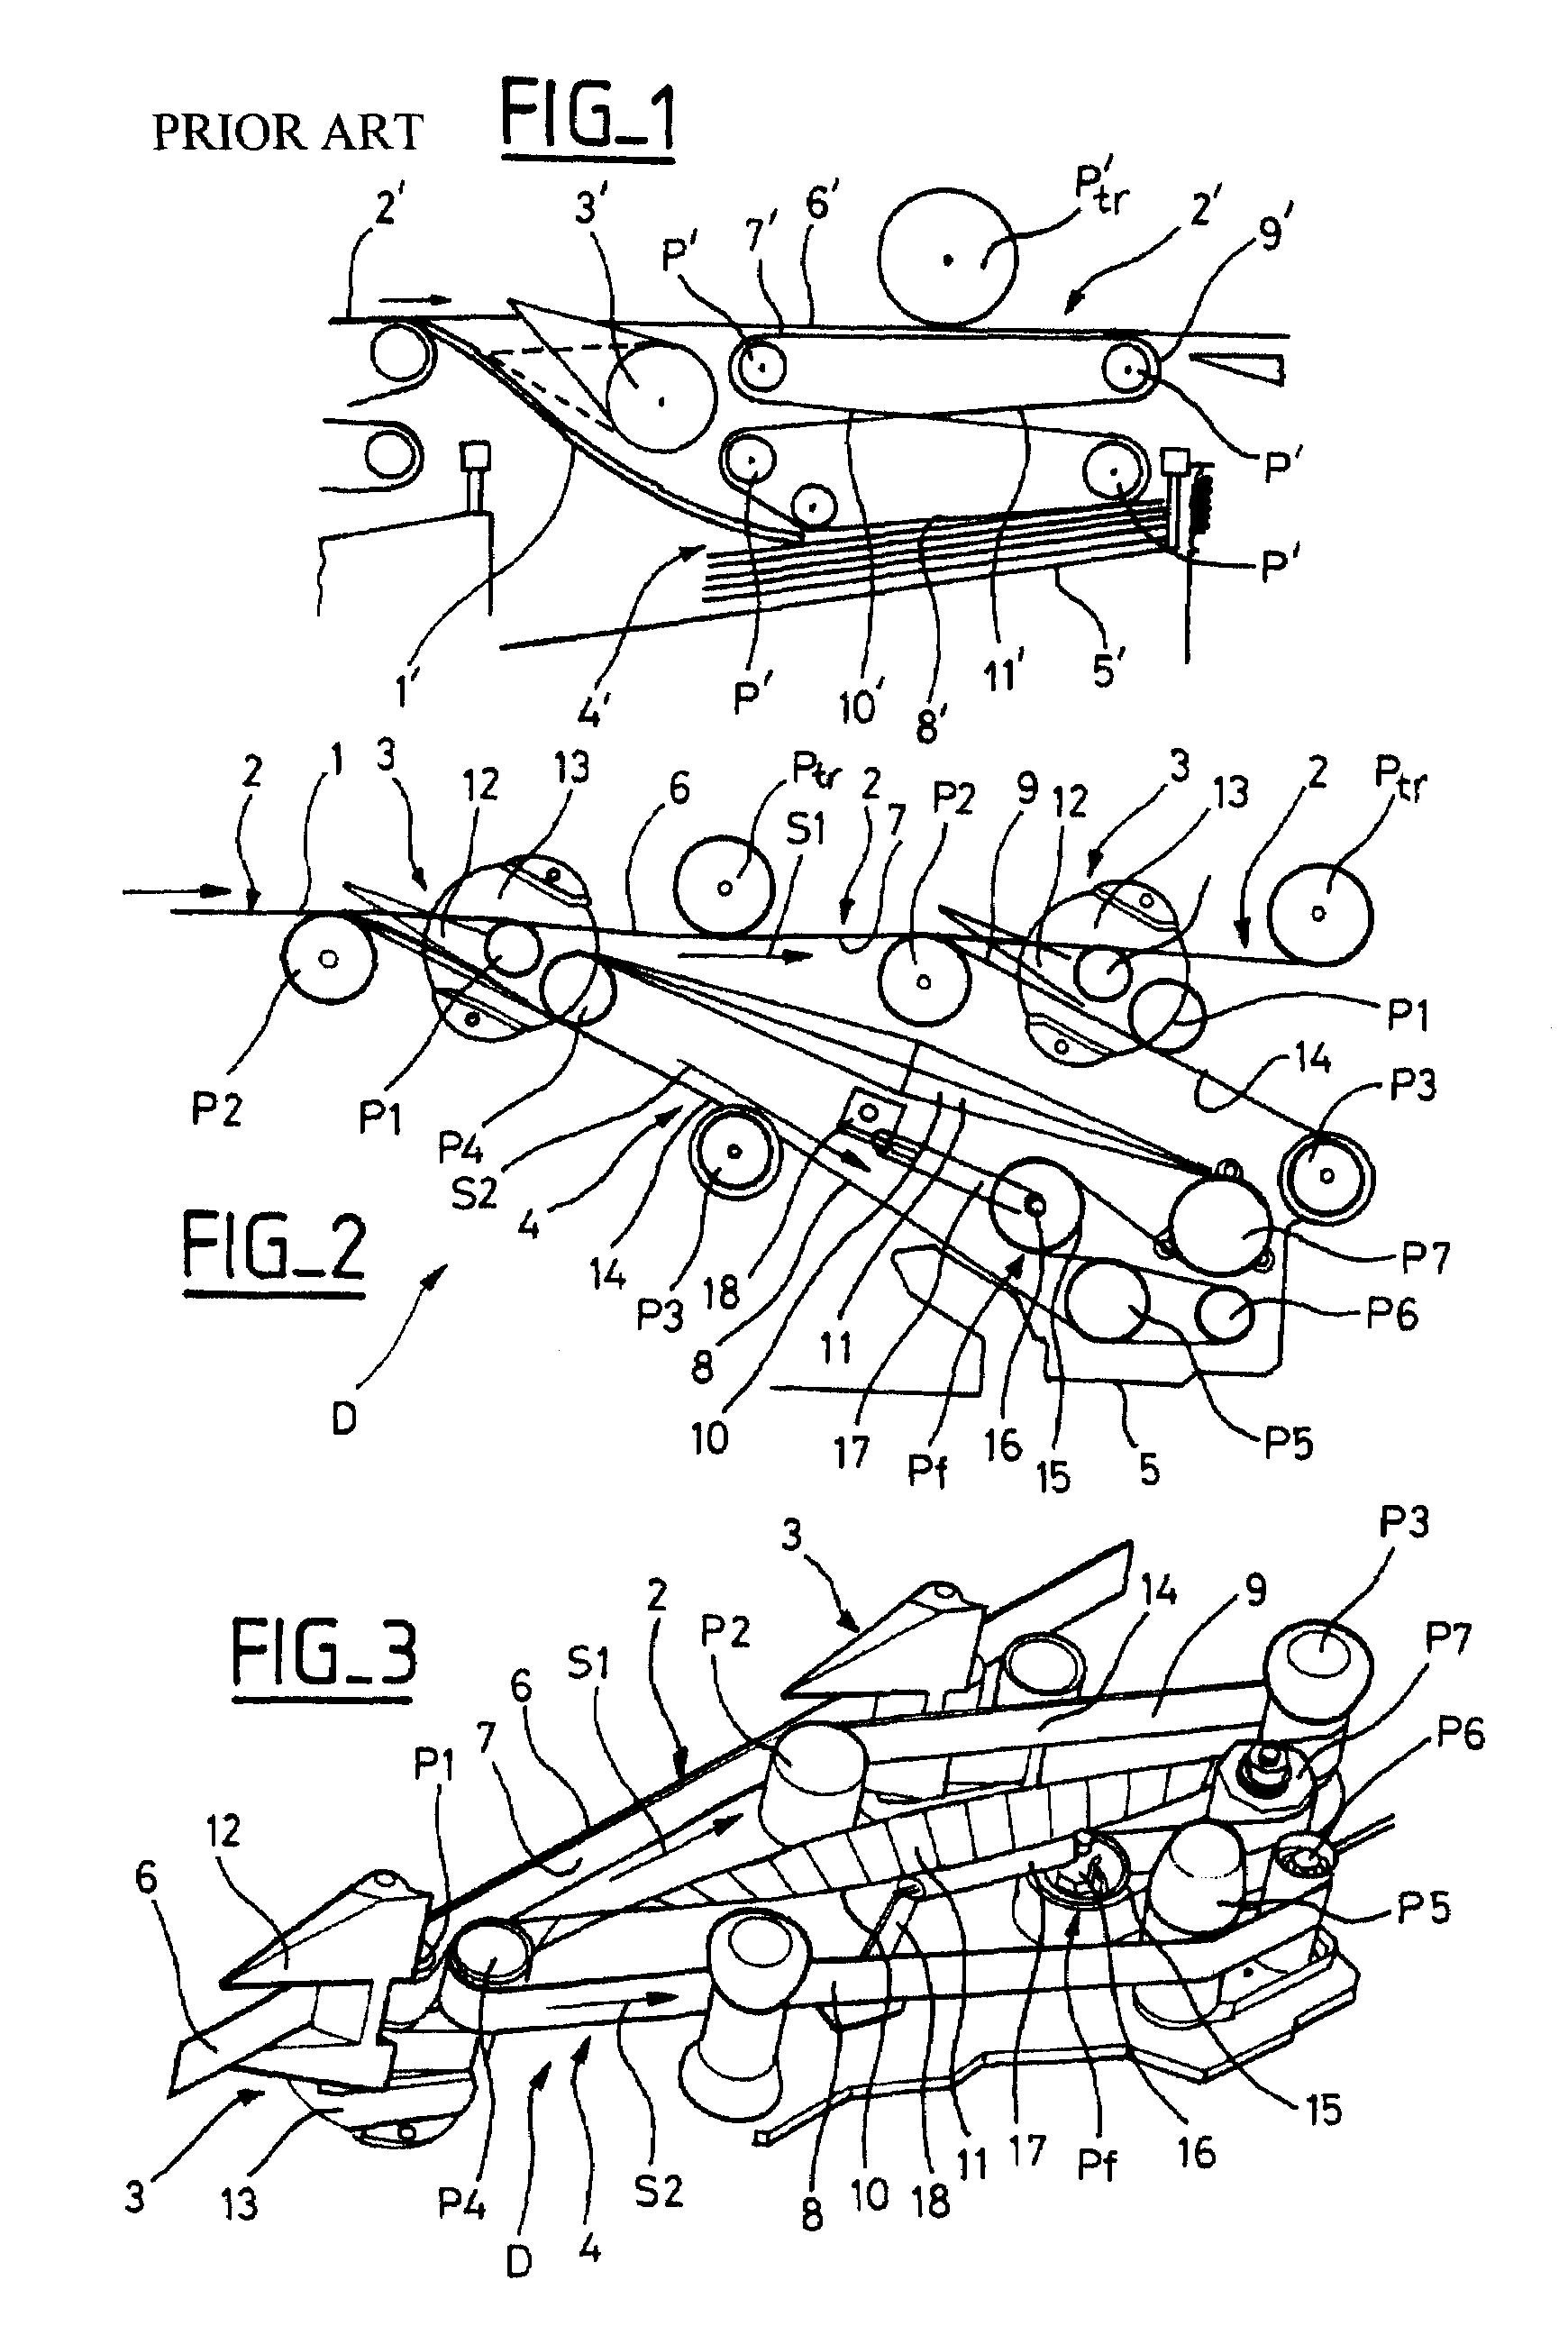 Conveyor apparatus having a twice-twisted belt and a floating-tension pulley